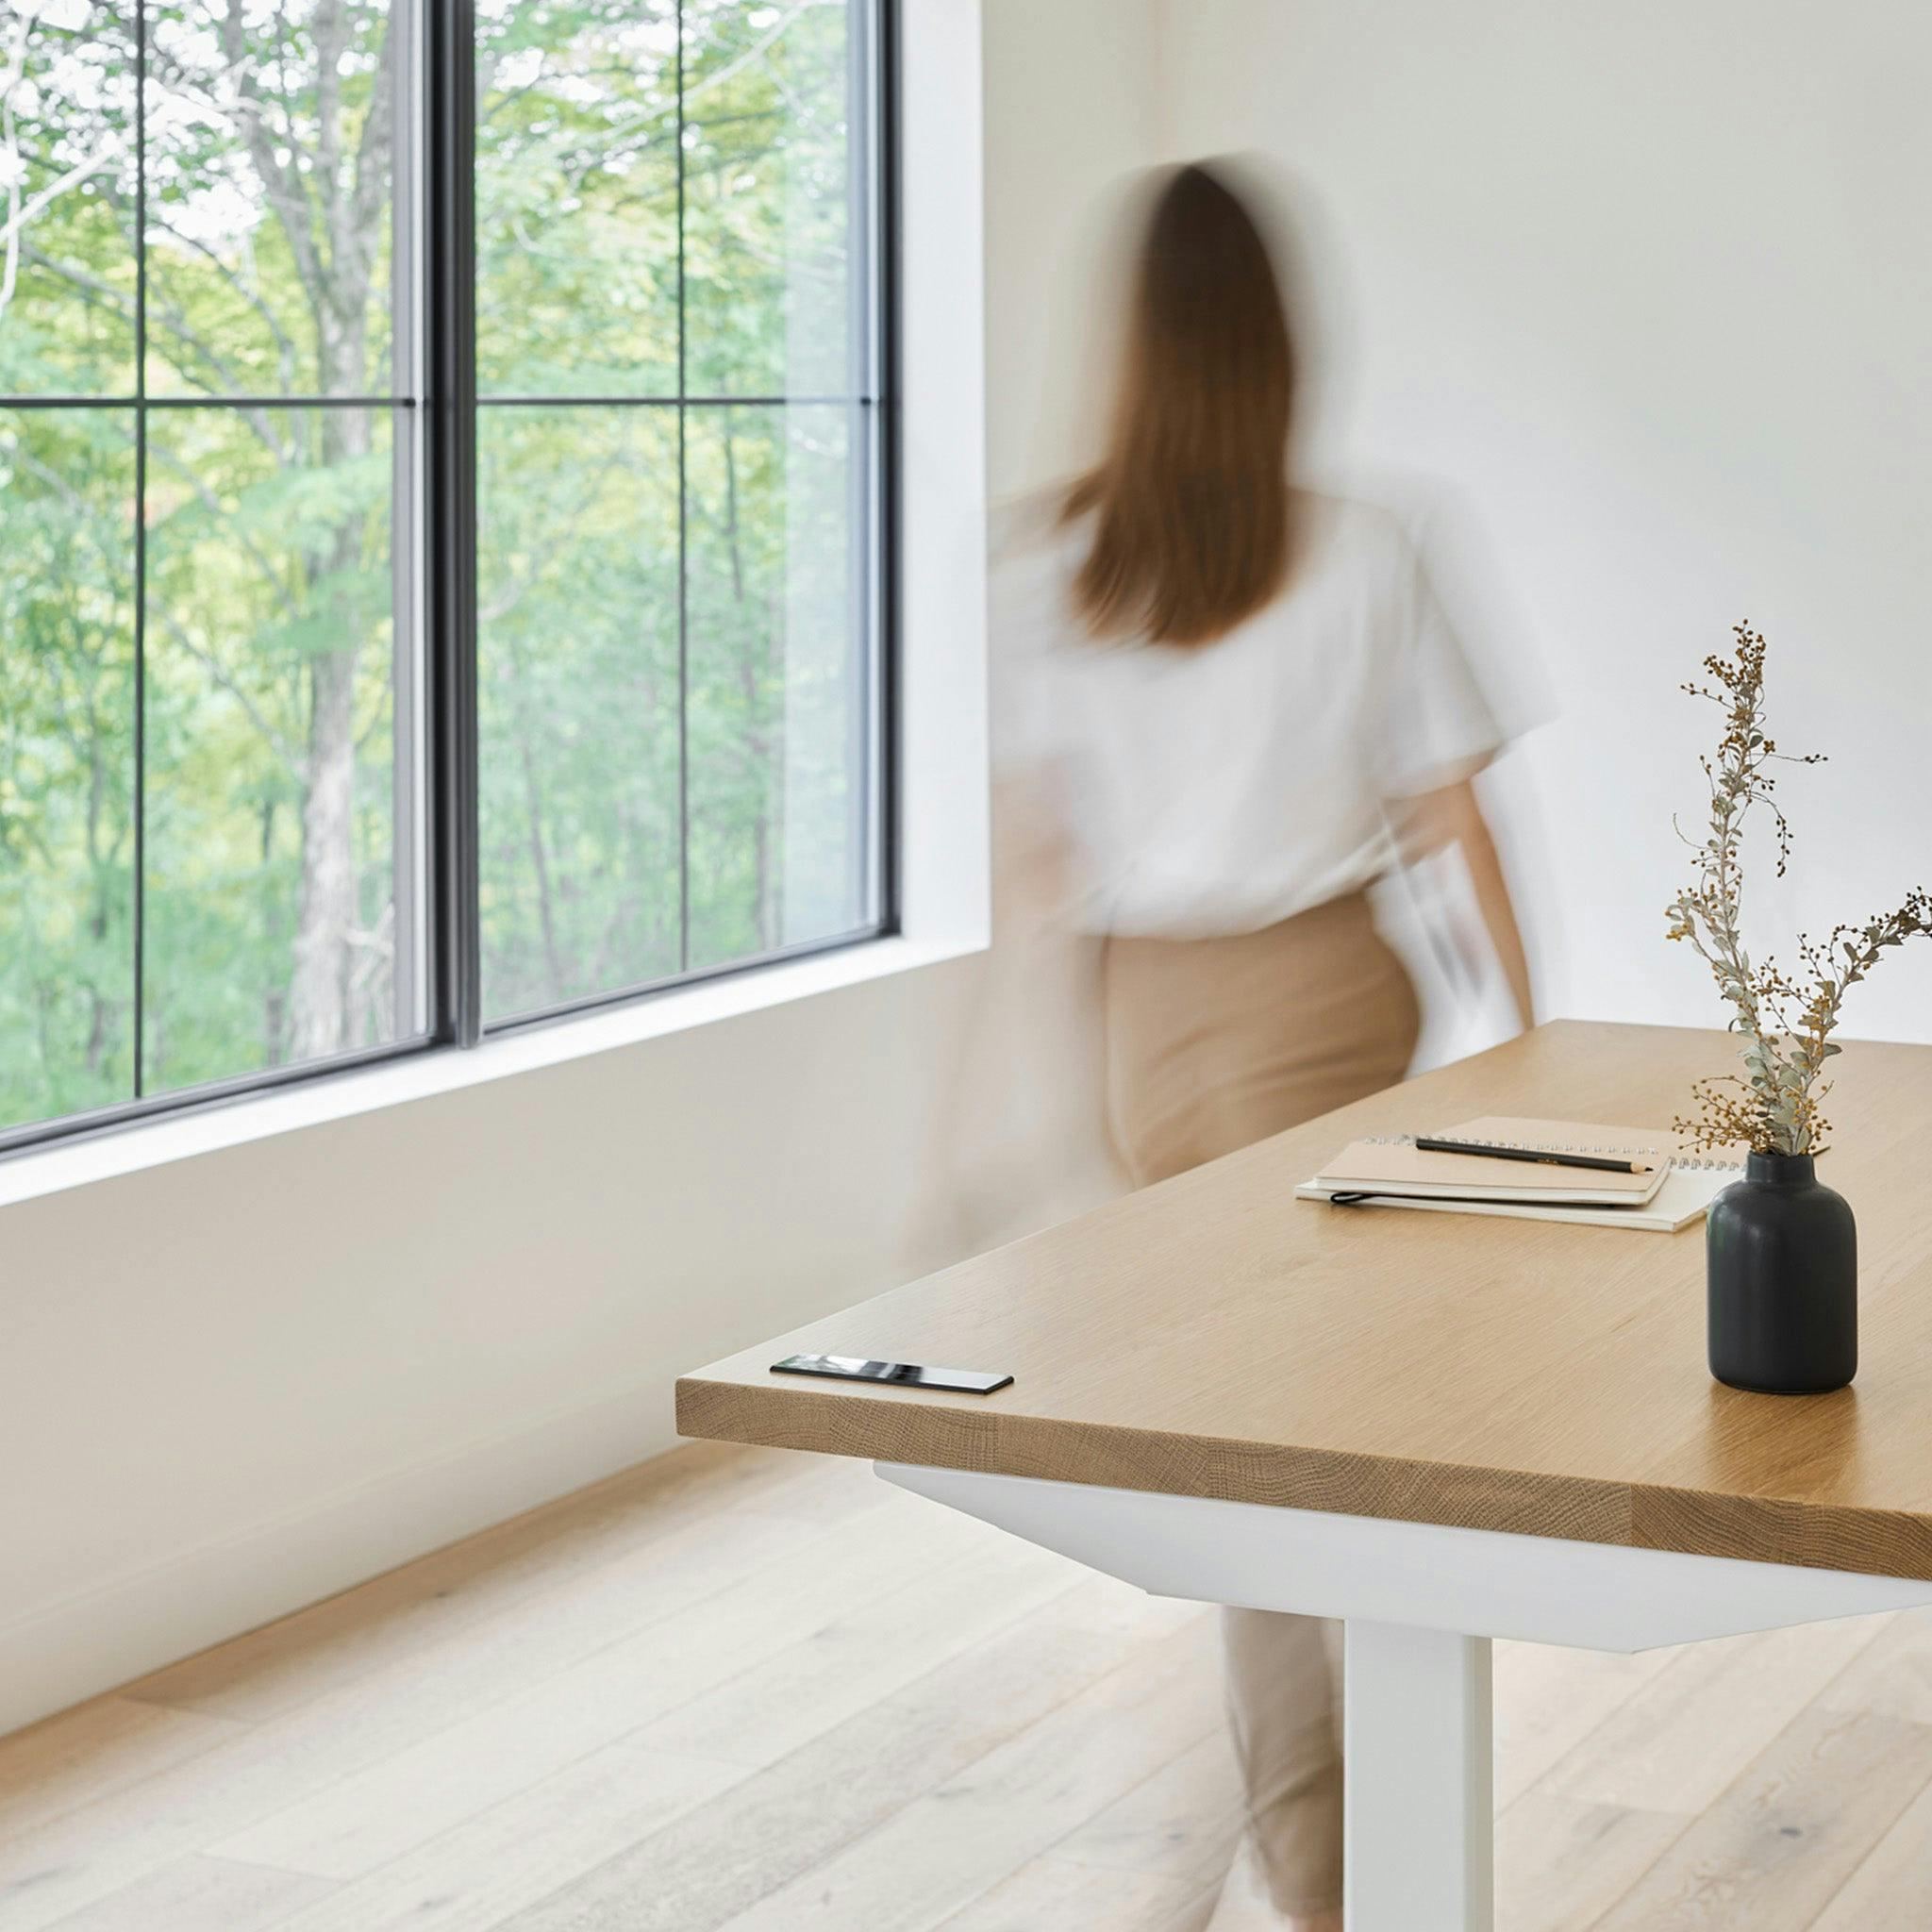 Blurred woman walking past a wooden standing desk